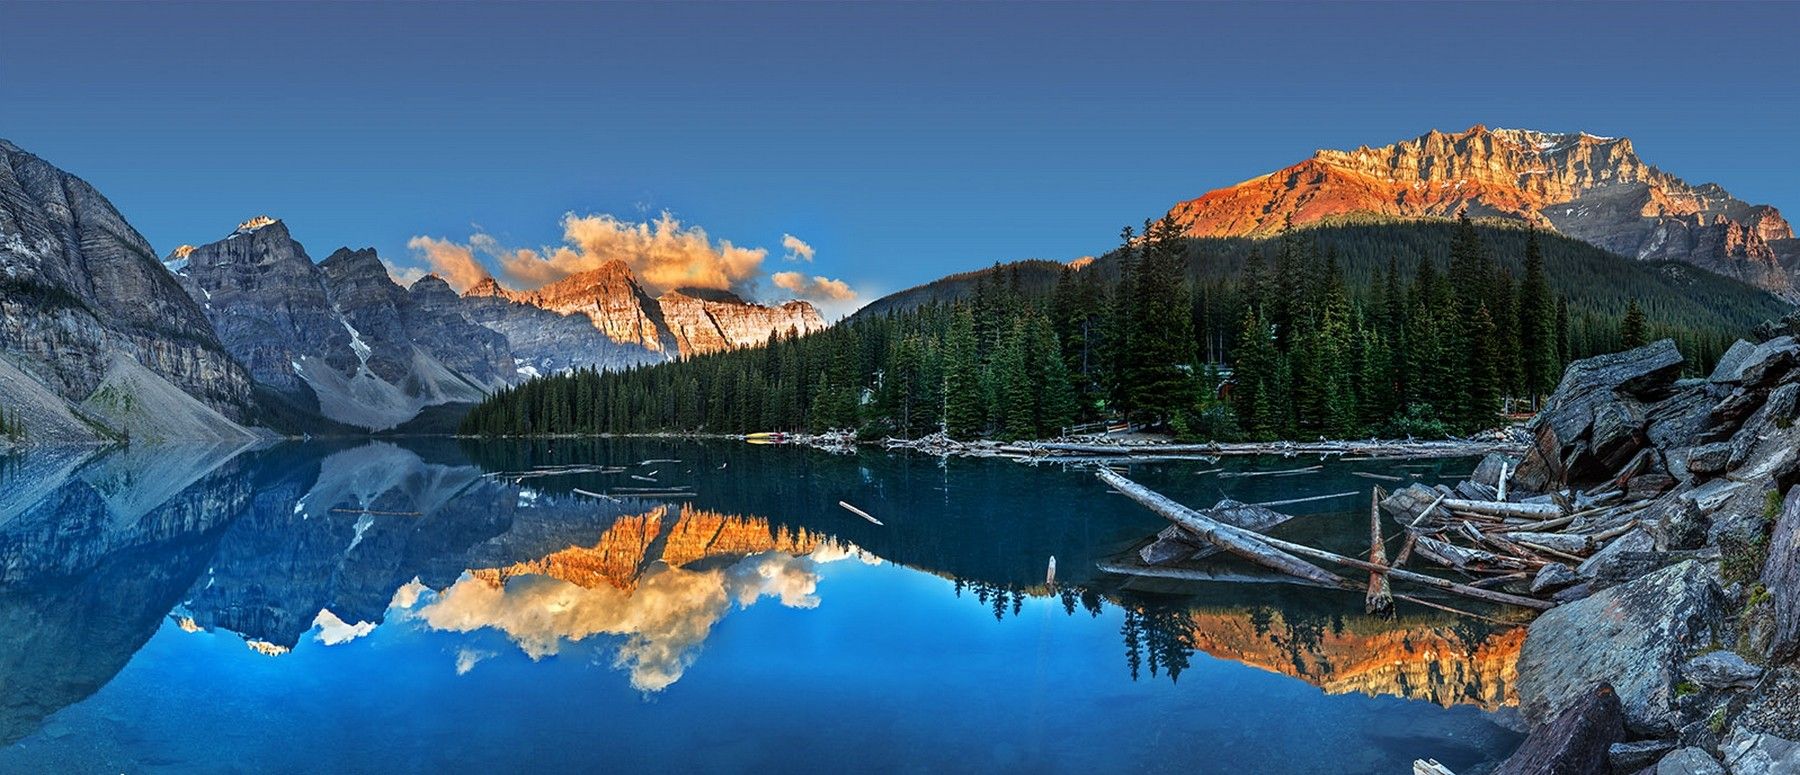 Moraine Lake Sunset Summer Lake Canada Mountains Water Forest Cliff Reflection Blue Clouds Nature La Wallpaper:1800x775